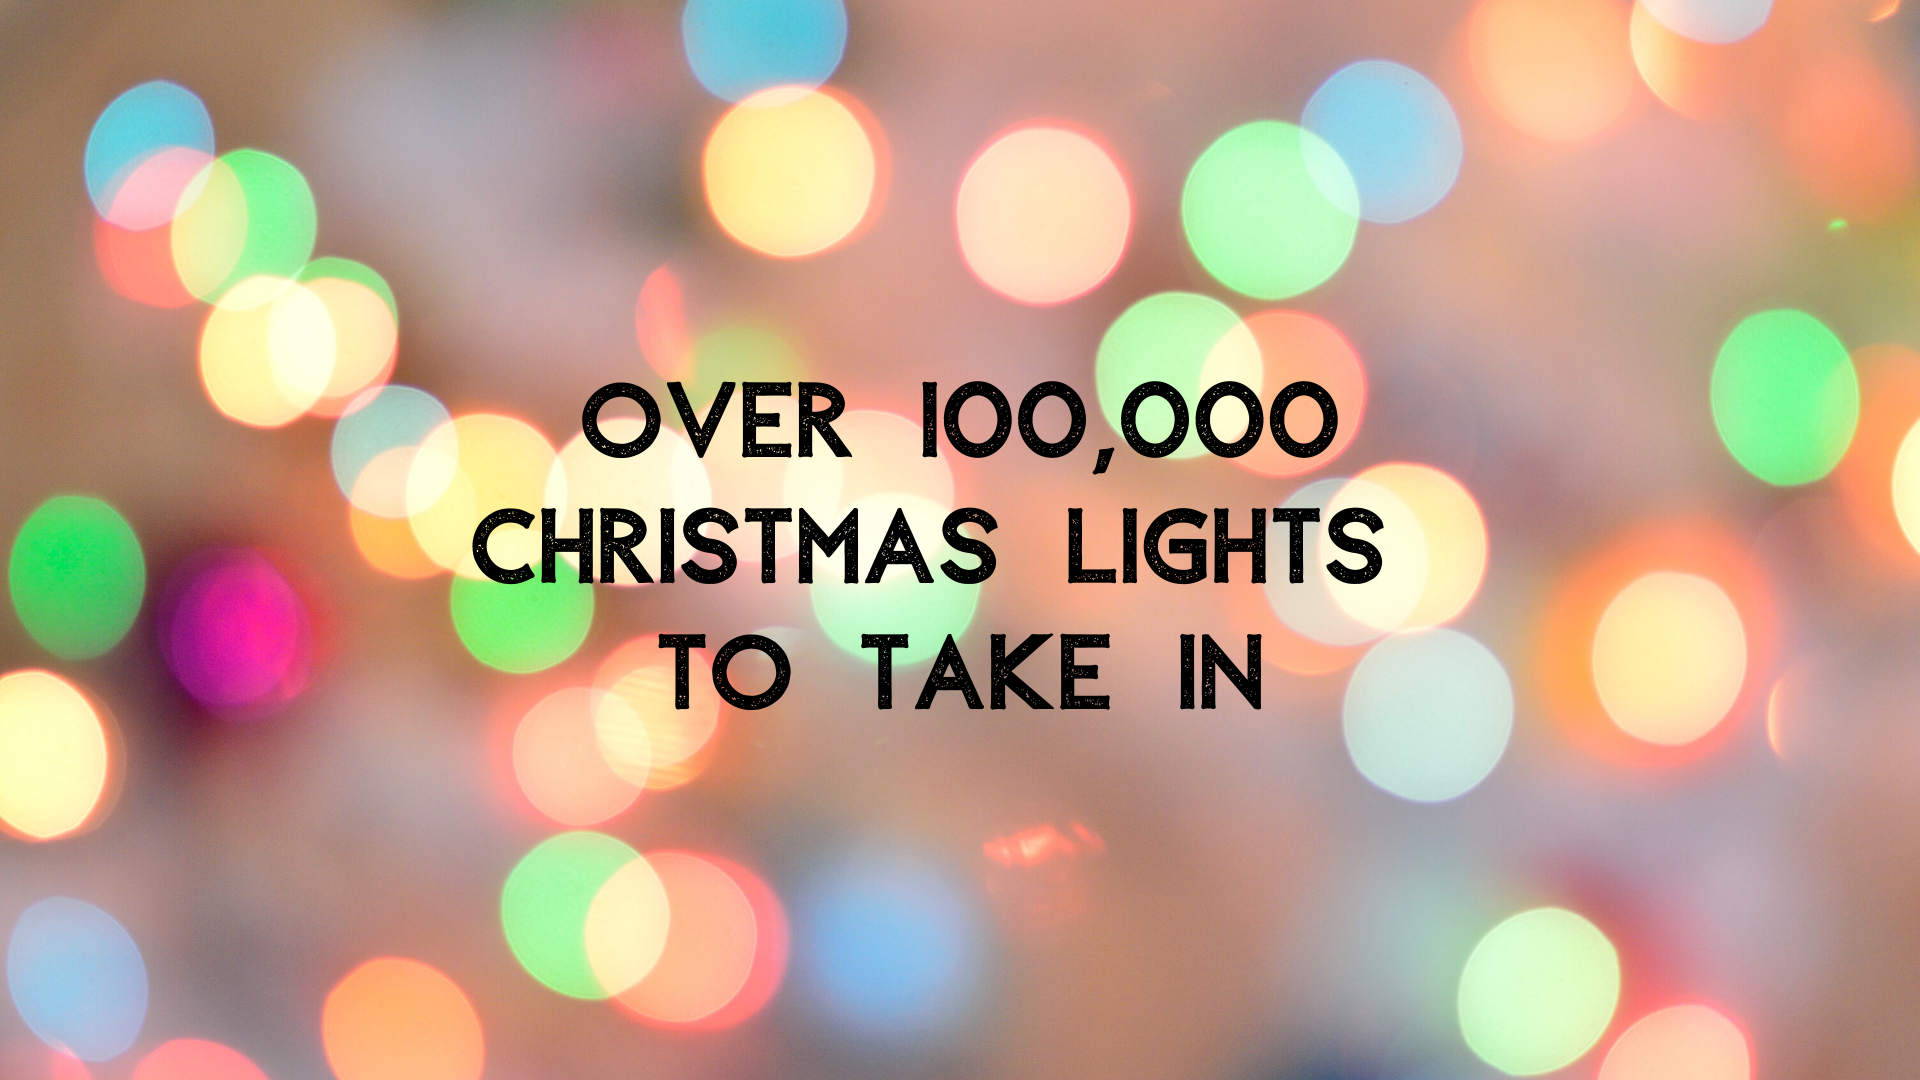 Over 100,000 Christmas Lights To Take In